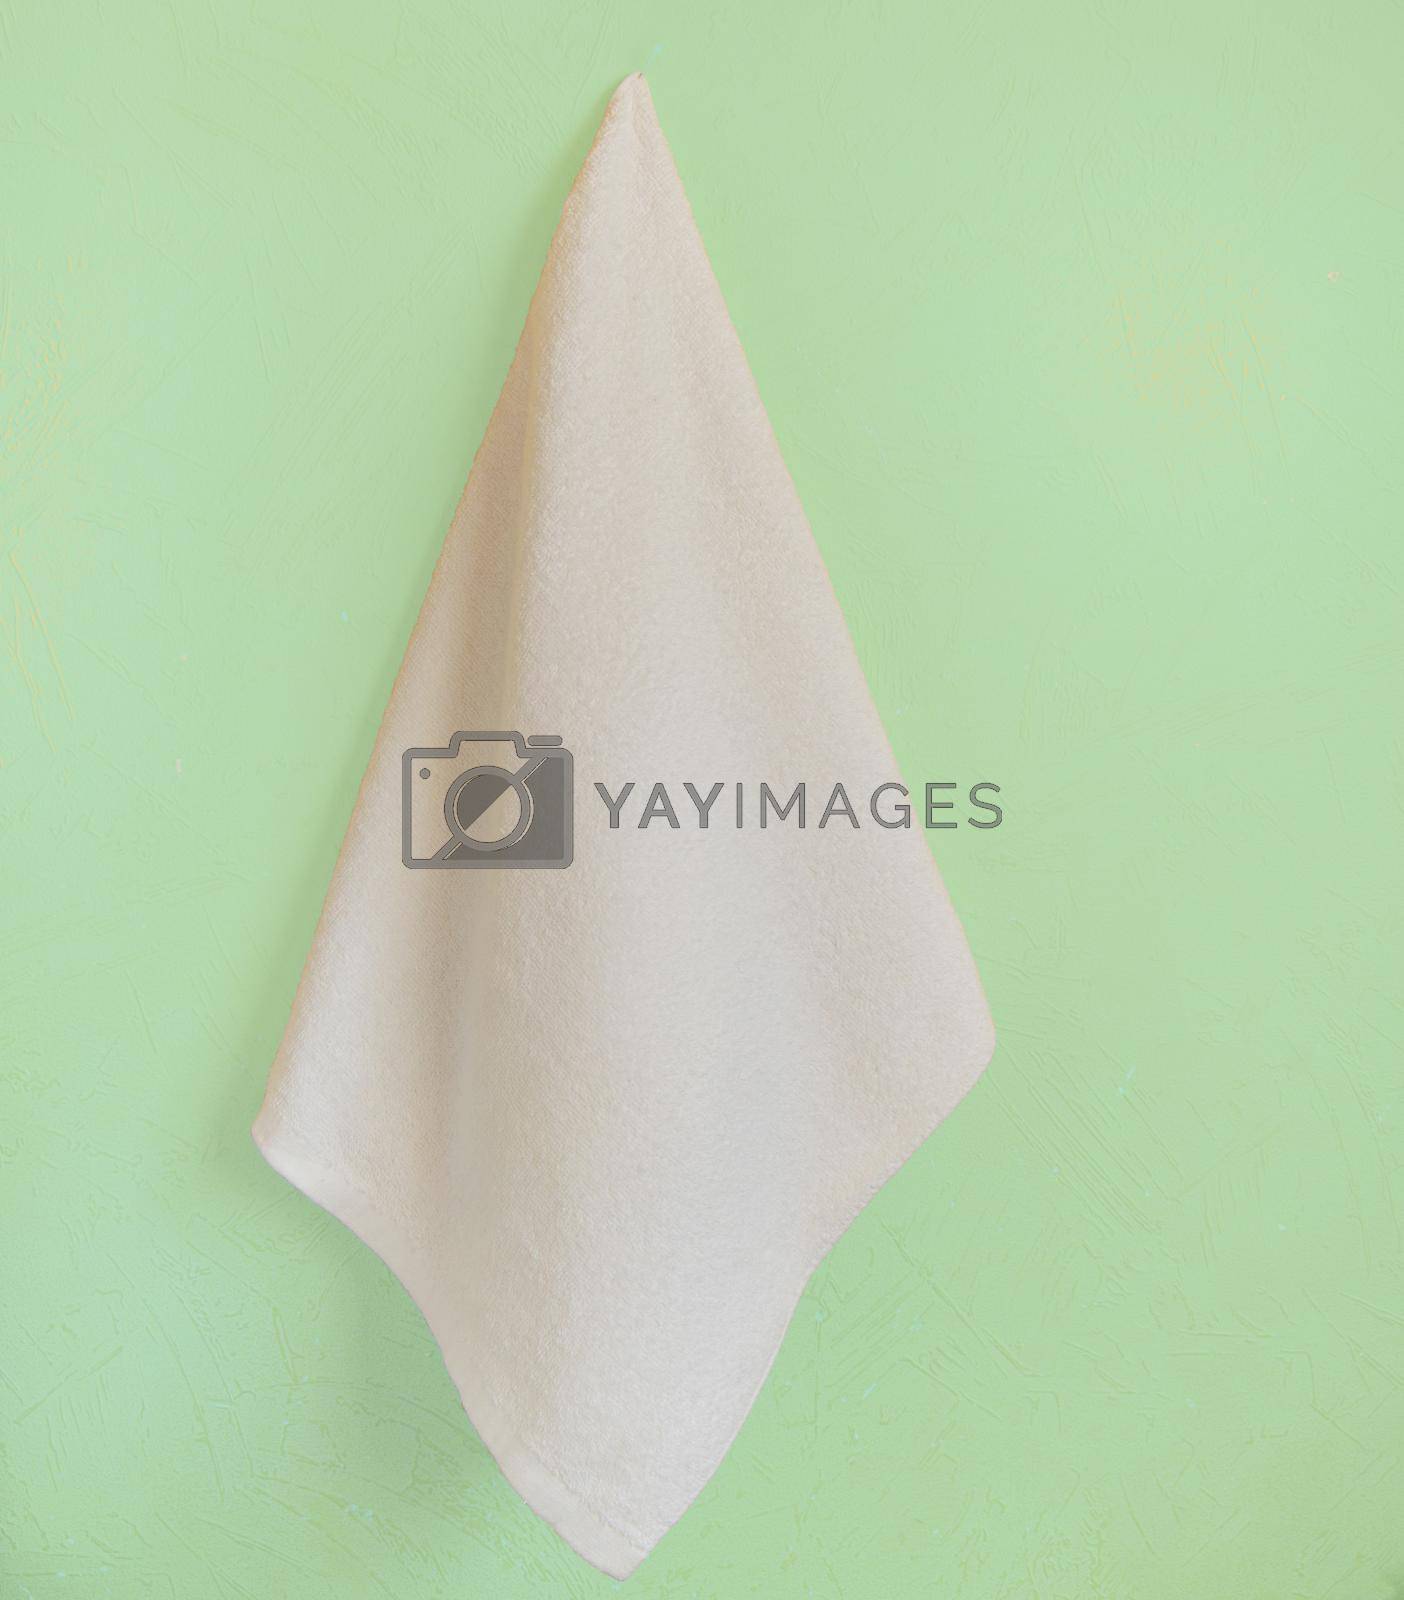 White Spa towel hanging on a yellow wall.